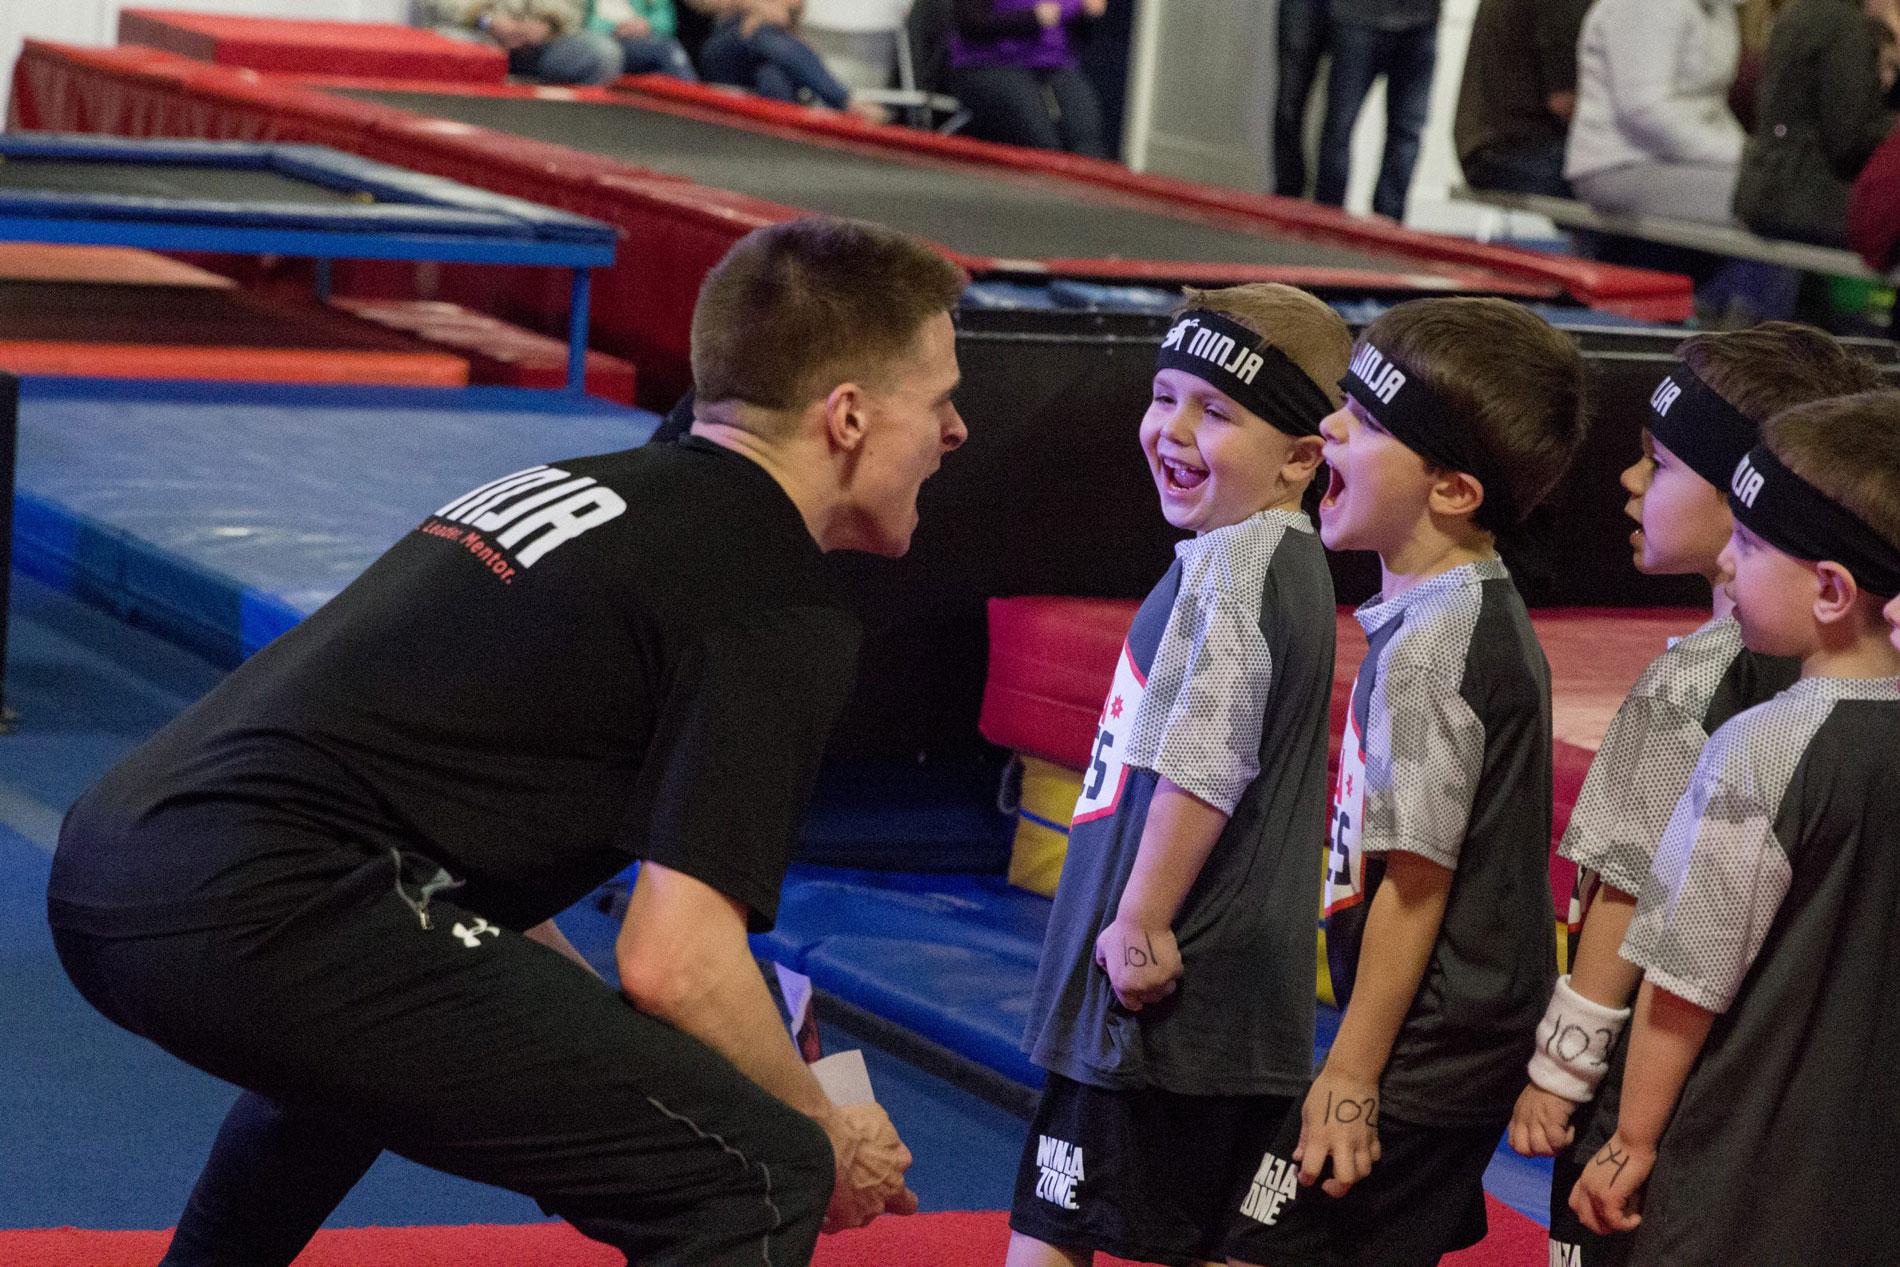 Coach in black Ninja Zone shirt enthusiastically motivating a line of young children wearing Ninja Zone headbands and jerseys at a gymnastics center.